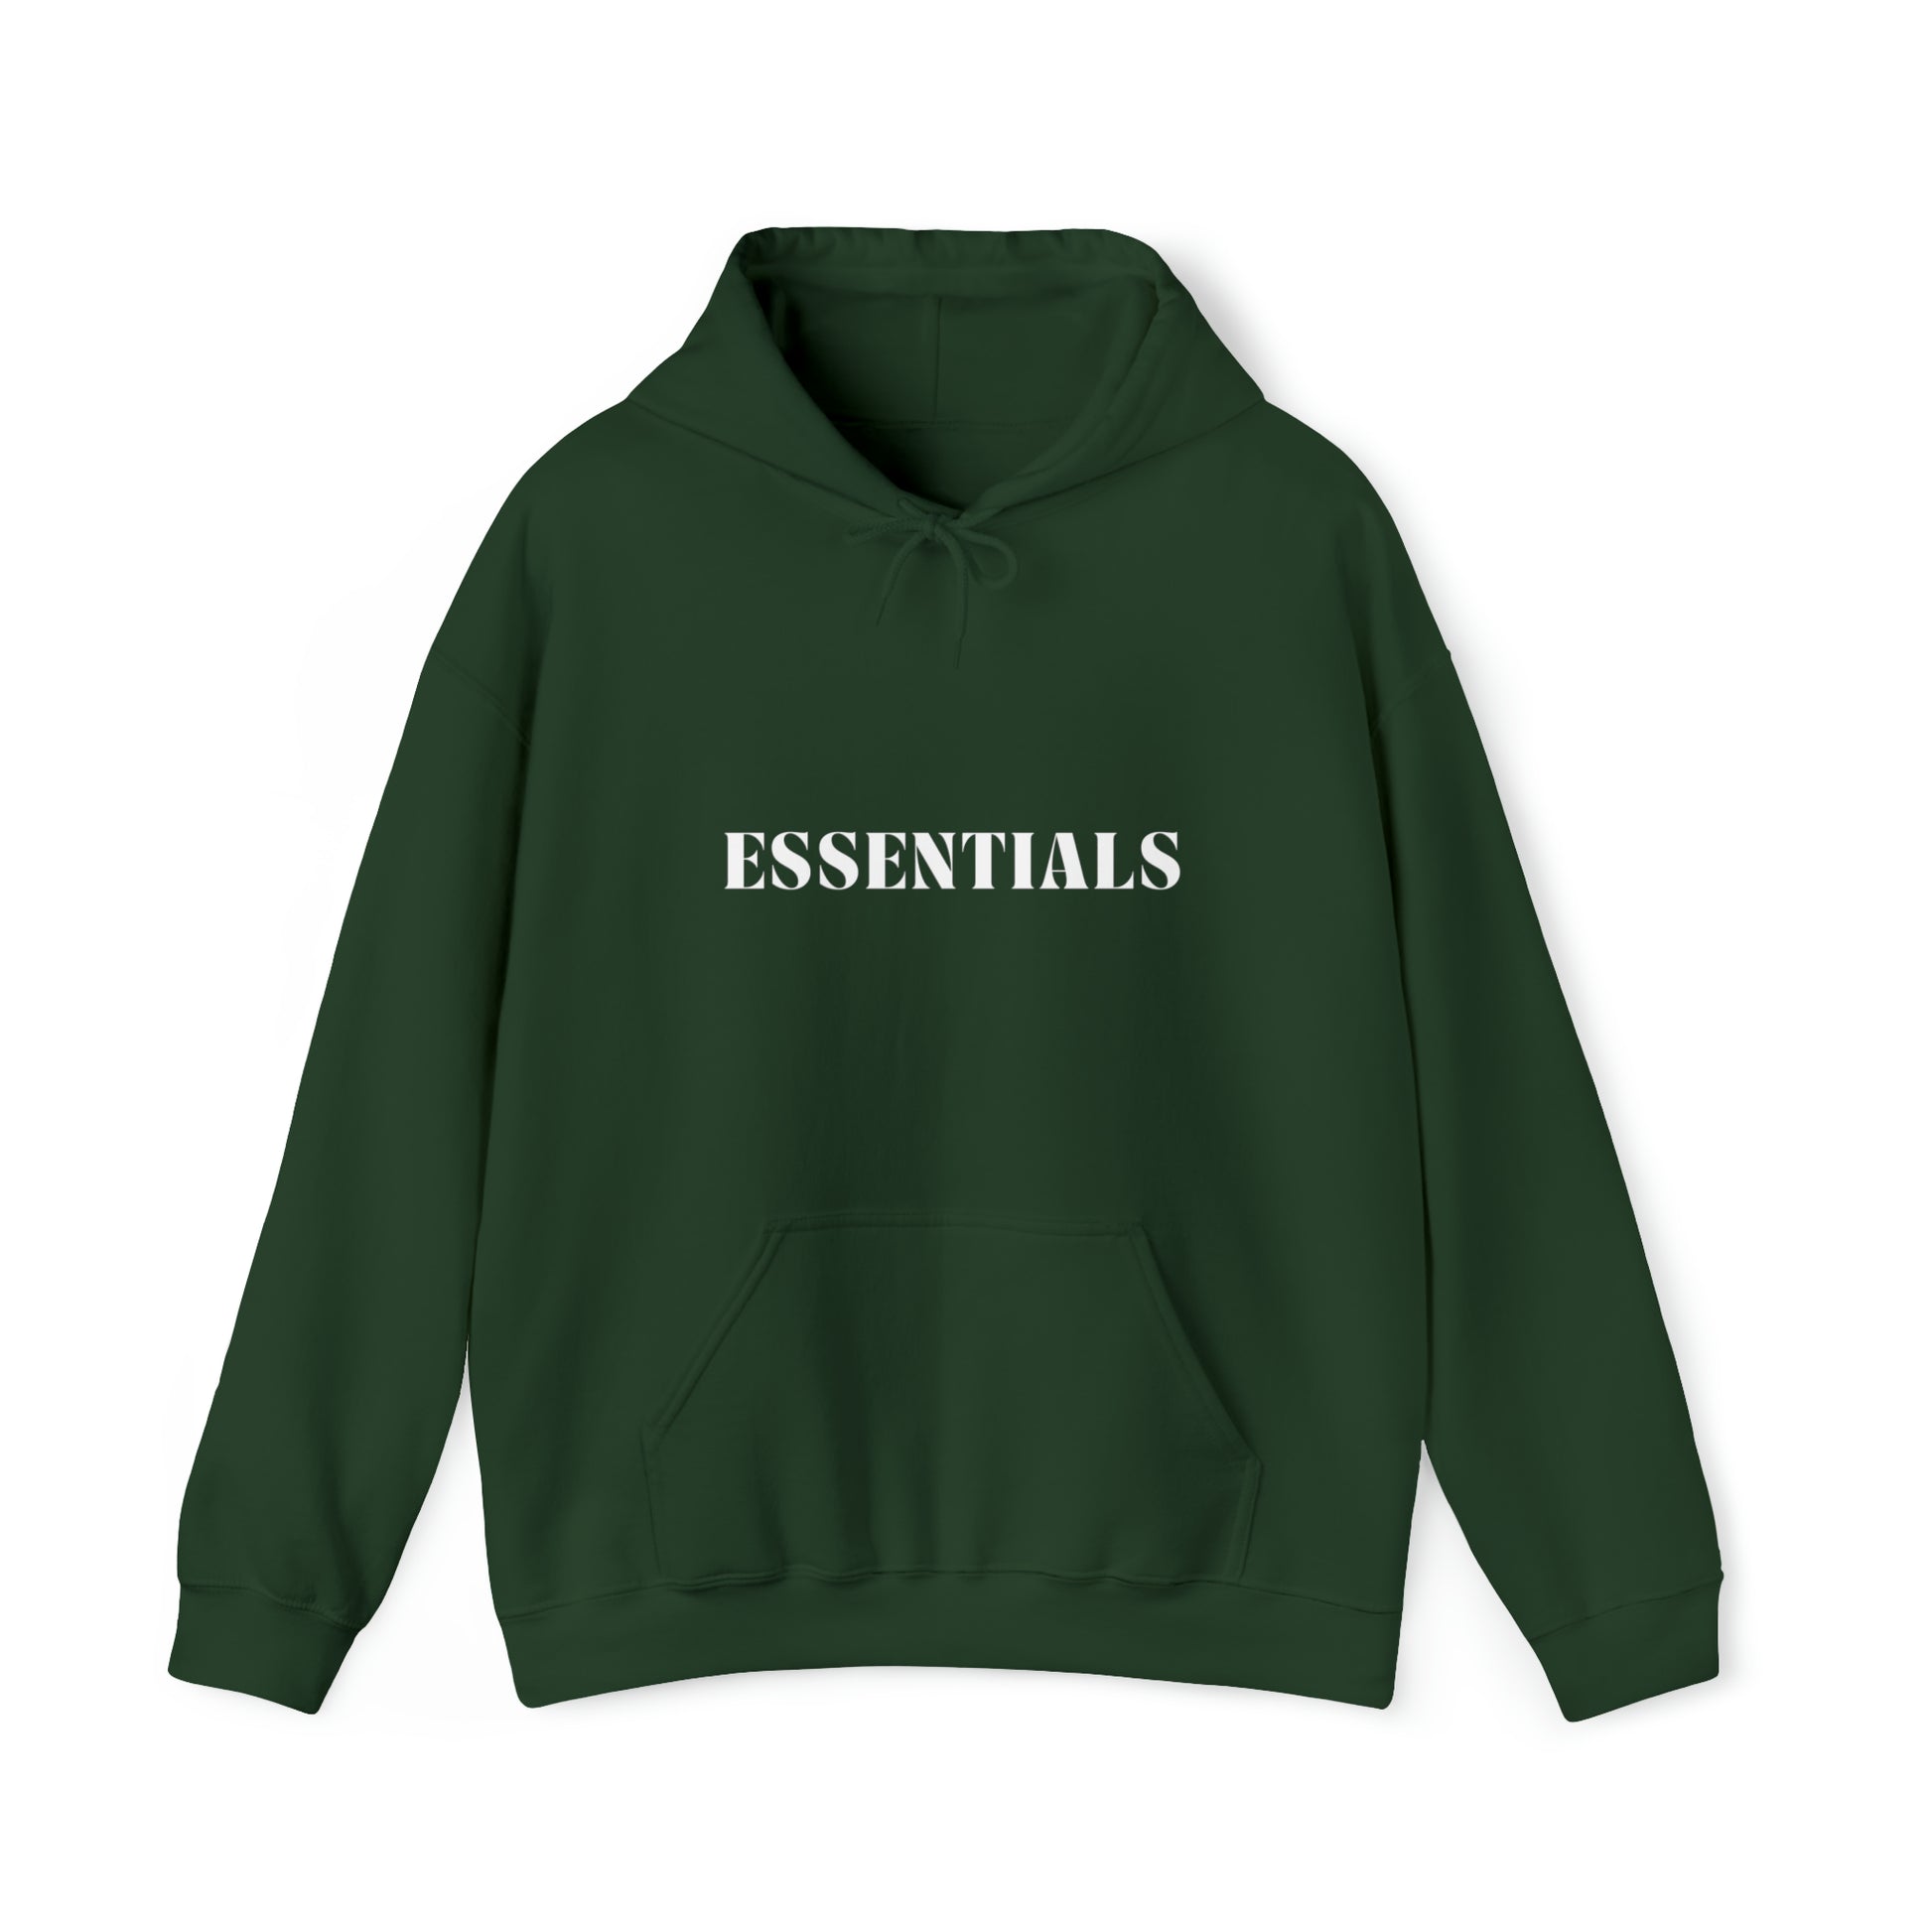 S Forest Green Essentials Hoodie from HoodySZN.com